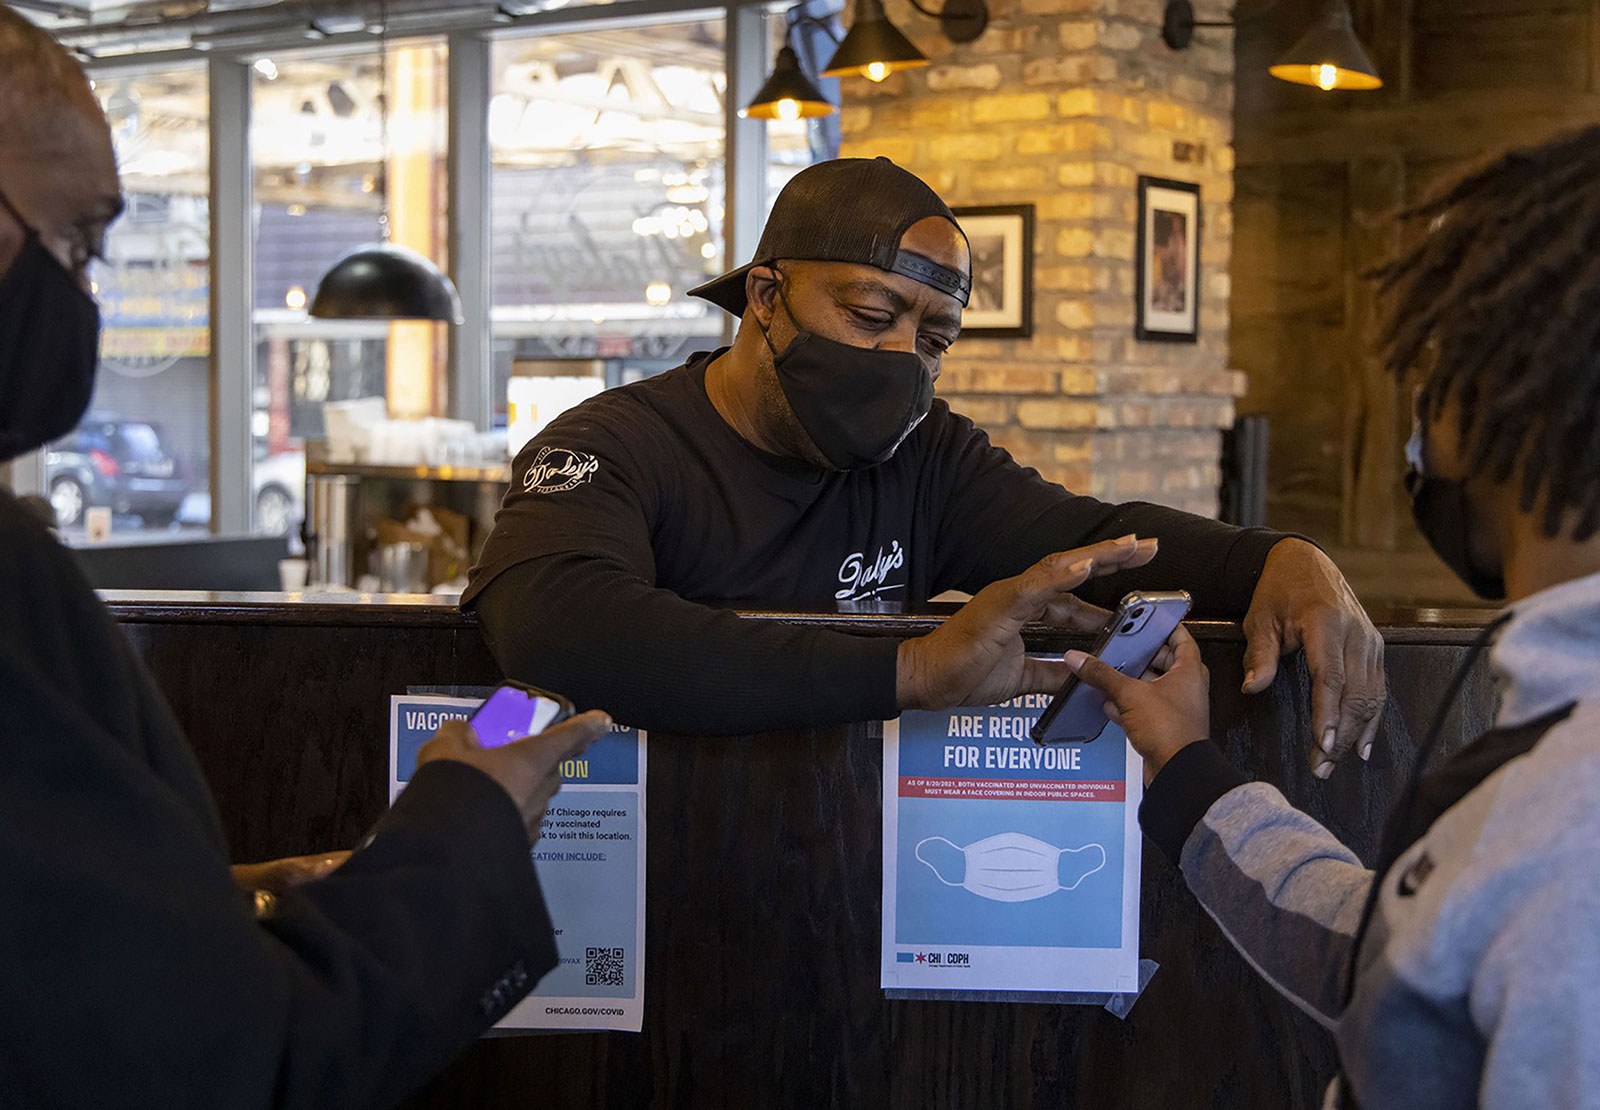 Arthur Mickle checks vaccine cards at Daley's Restaurant in Chicago on January 9.